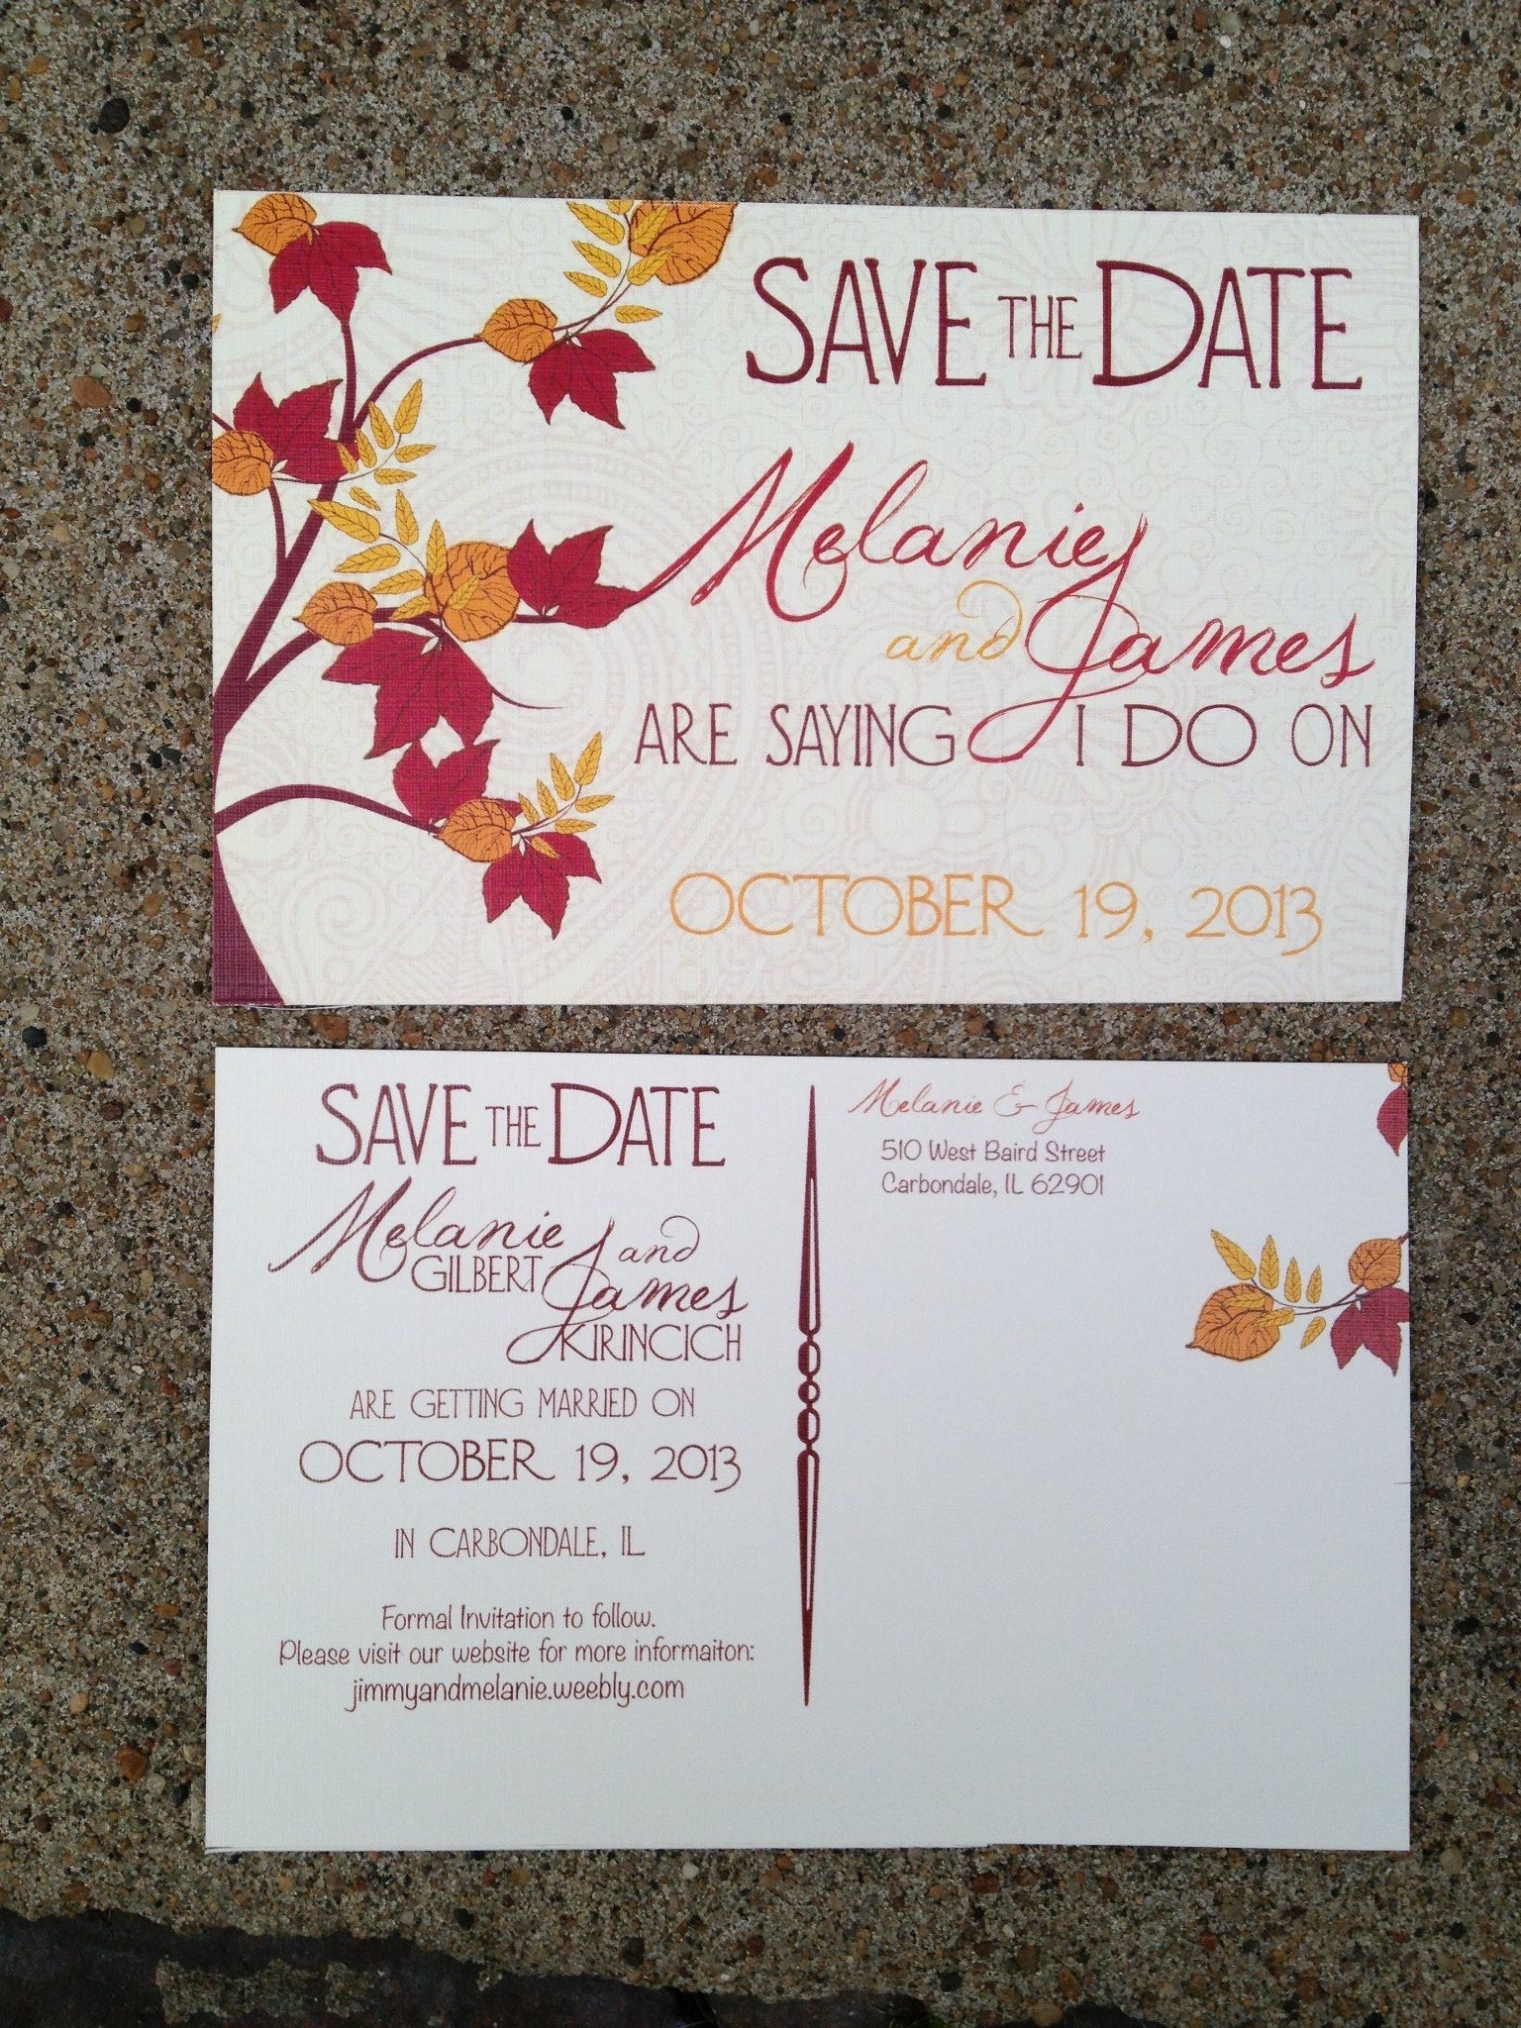 Save The Date Cards Templates For Weddings with regard to Save The Date Postcards Templates